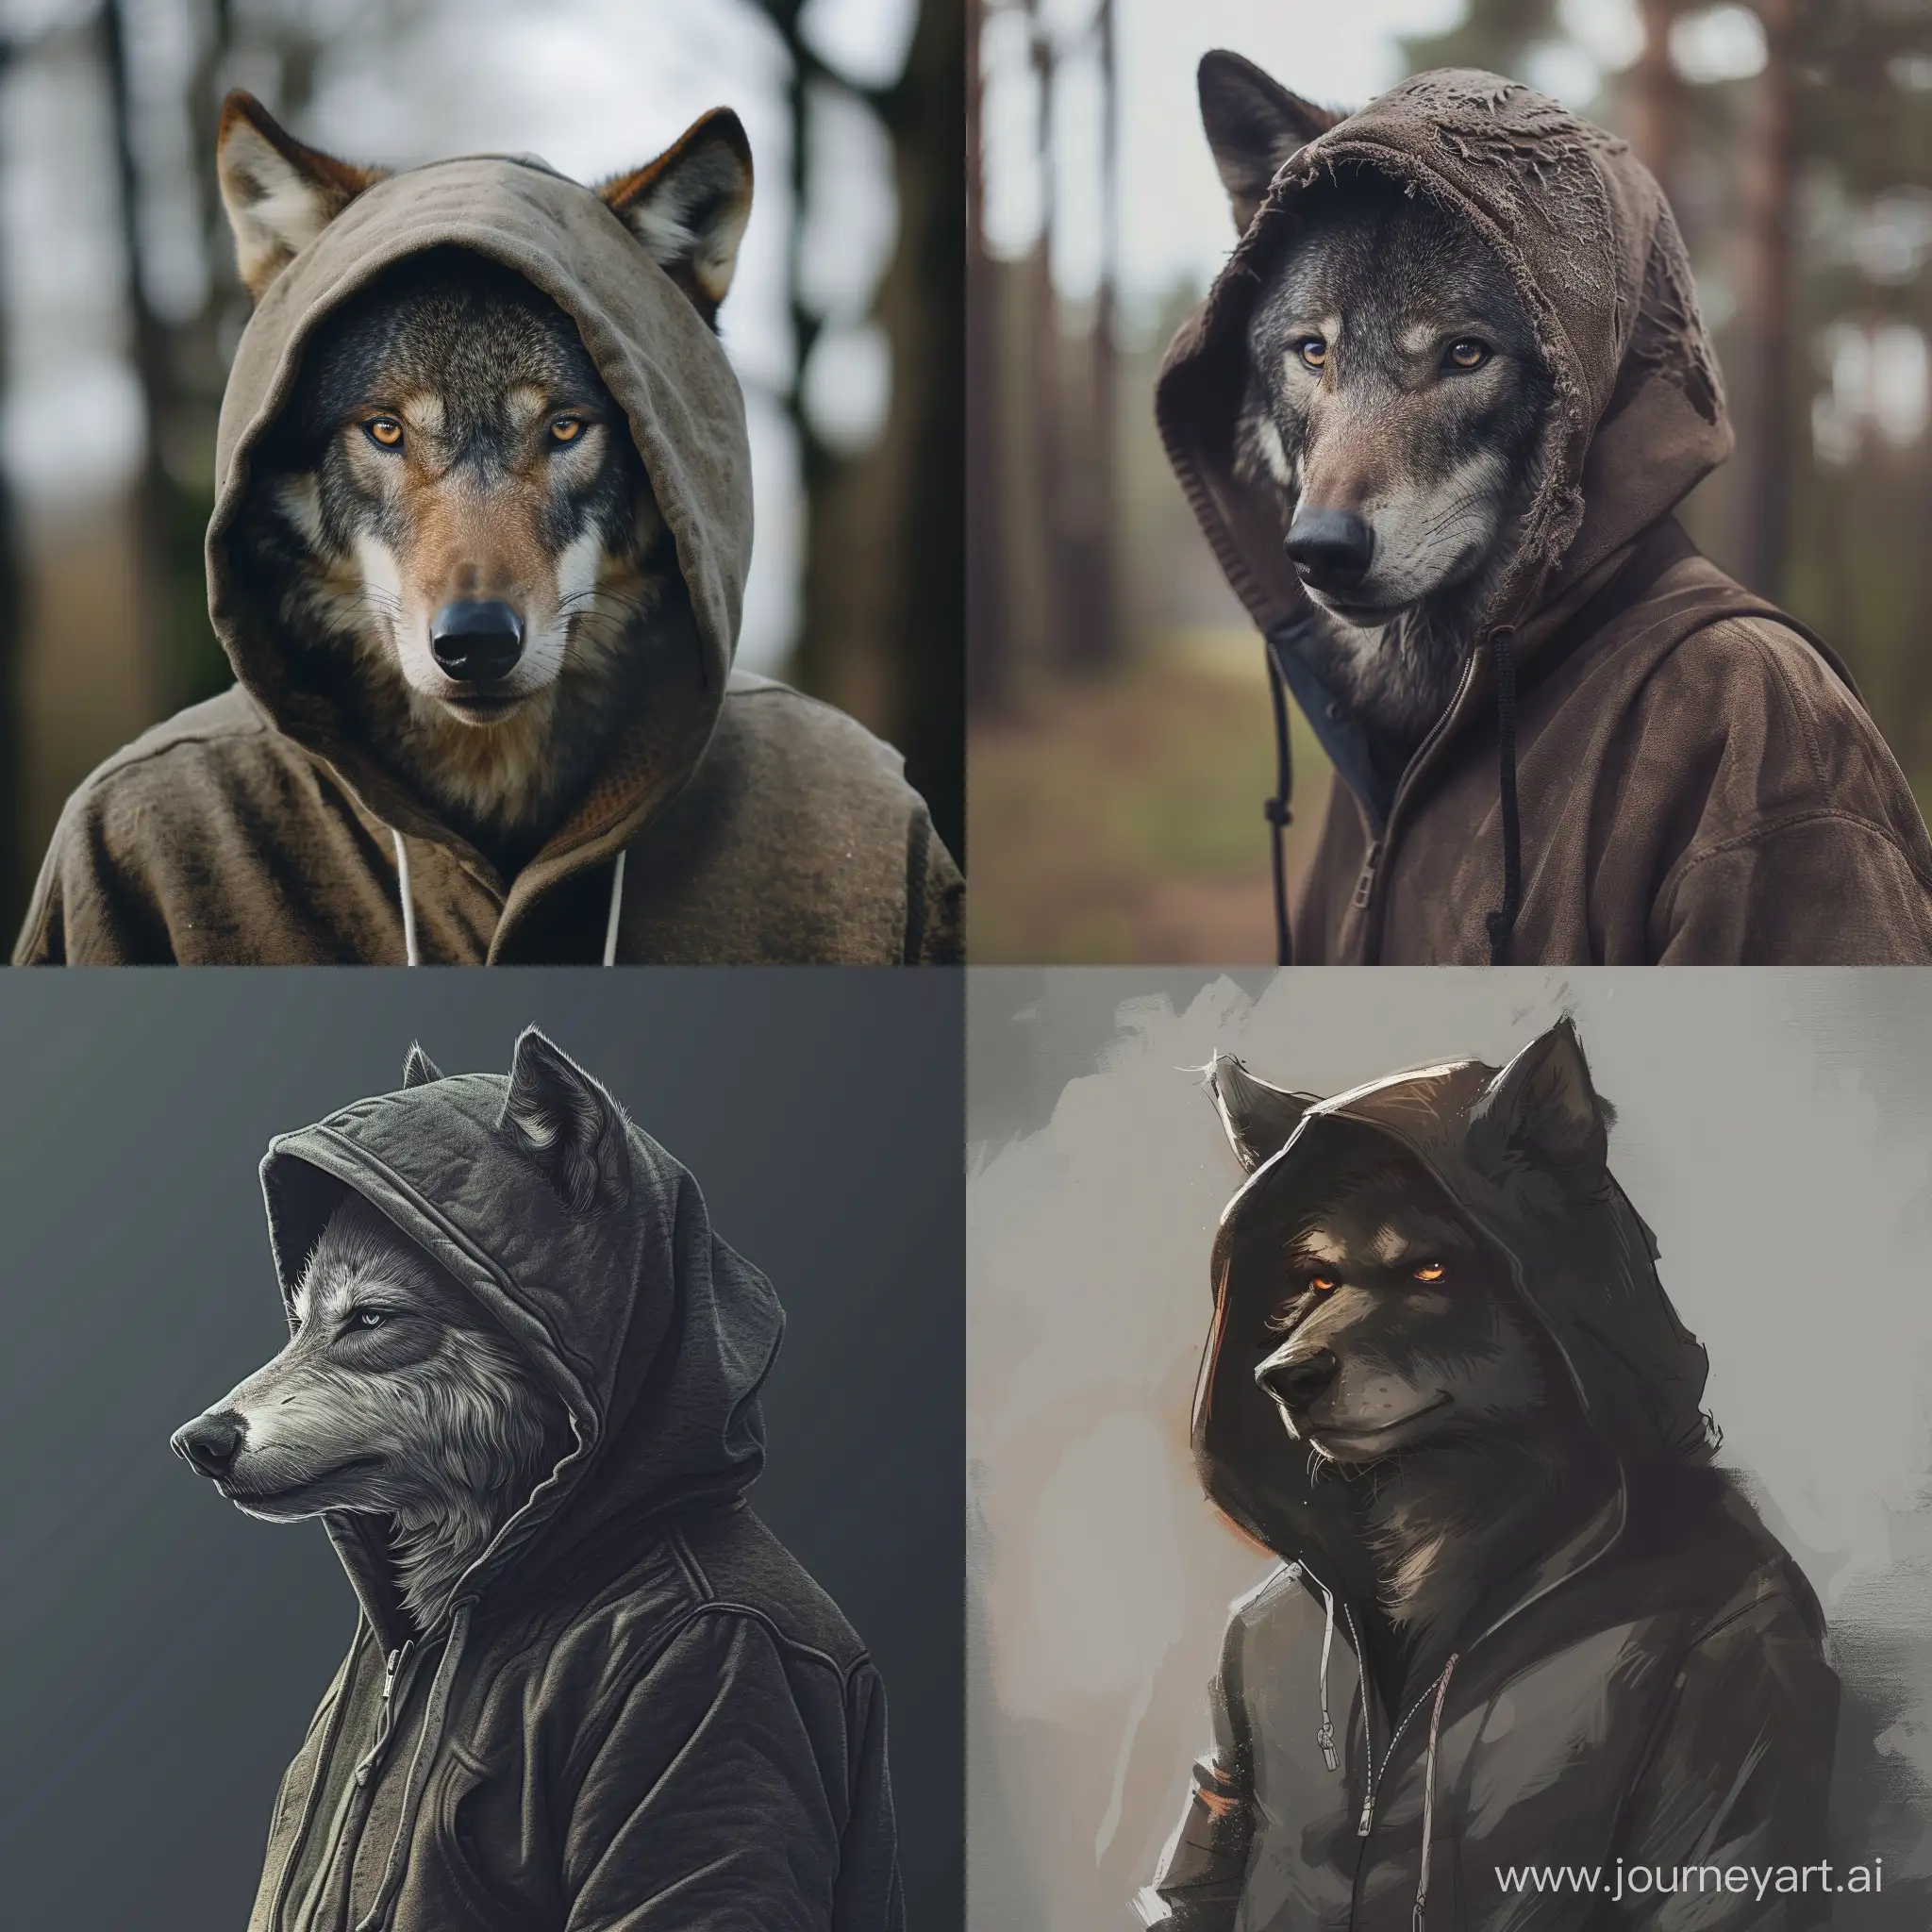 Mysterious-Hooded-ManWolf-in-Urban-Setting